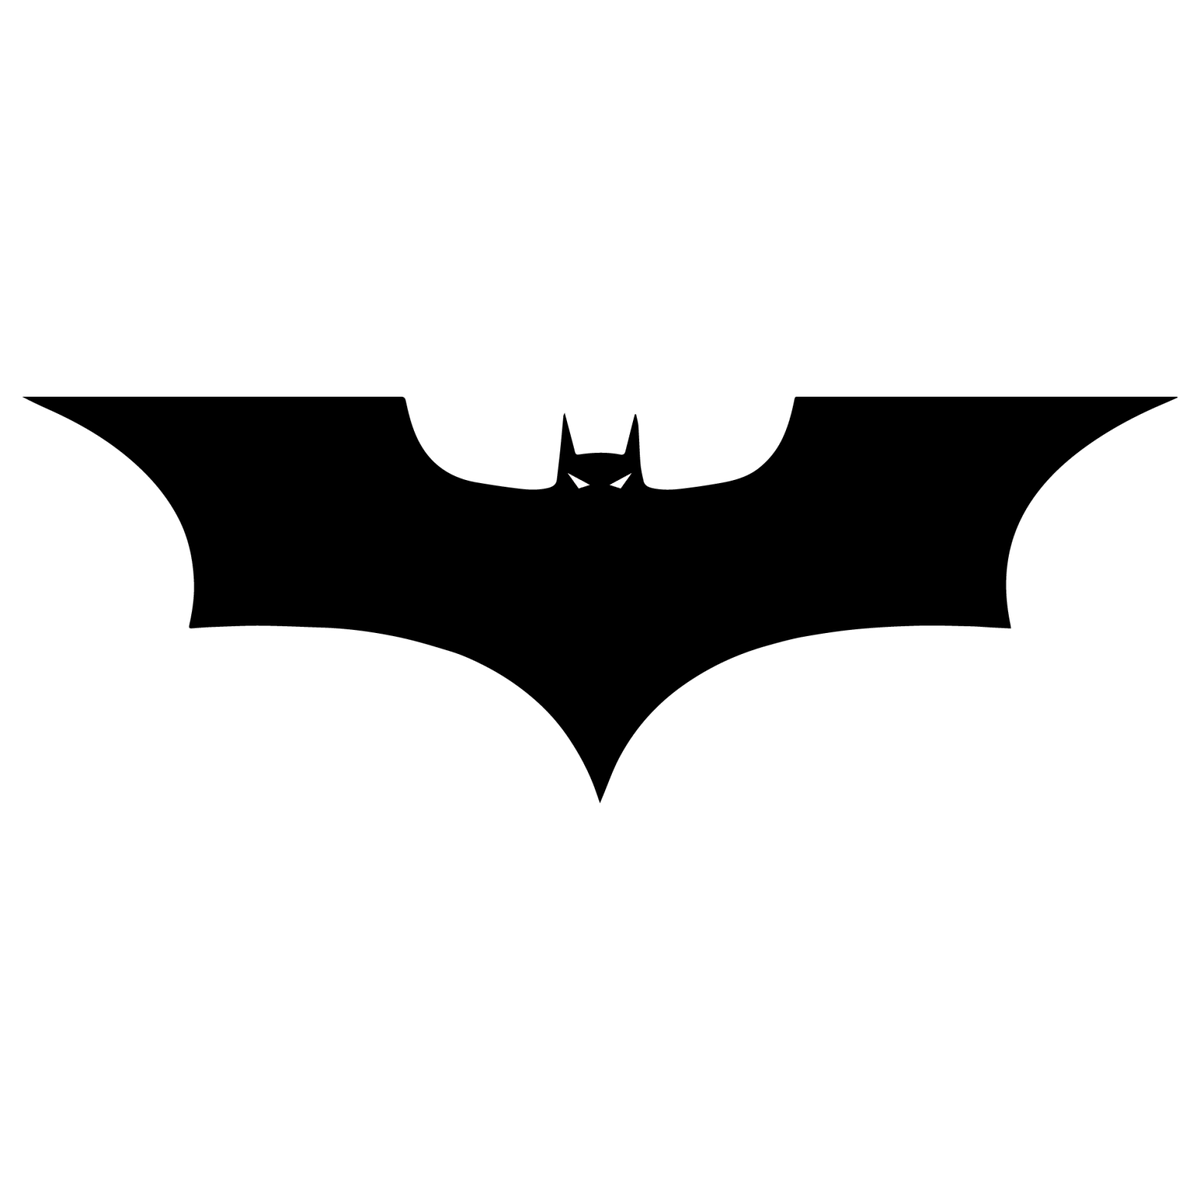 A 24" wide silhouette of a Cover-Alls bat superhero symbol with stylized, angular wings and pointed ears against a solid green background.